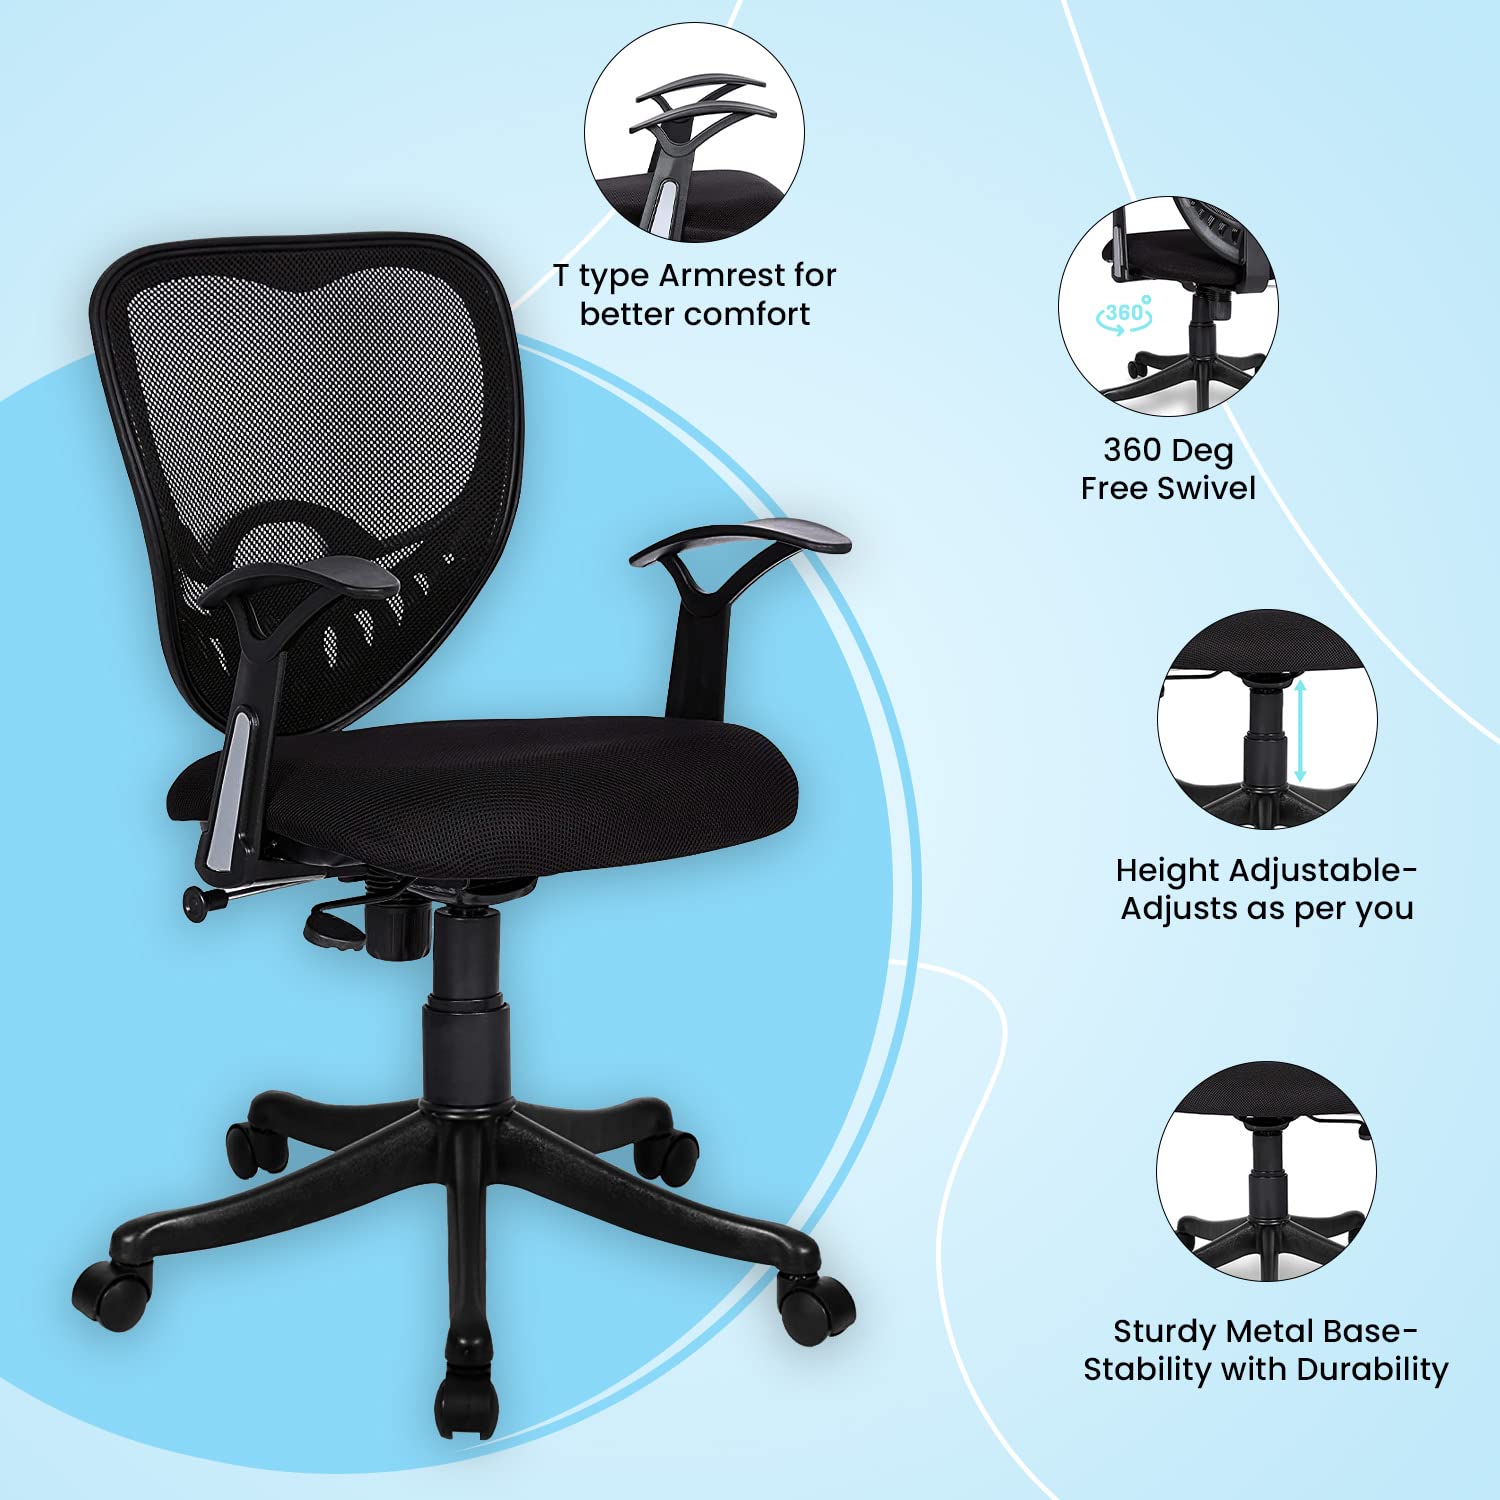 Savya Home® Delta Executive Ergonomic Office Chair| Height Adjustable Seat | Upholstered Seat and T type armrest Provides Better Comfort |Push Back Tilt Feature |Mid Back (Black, Qty-1)